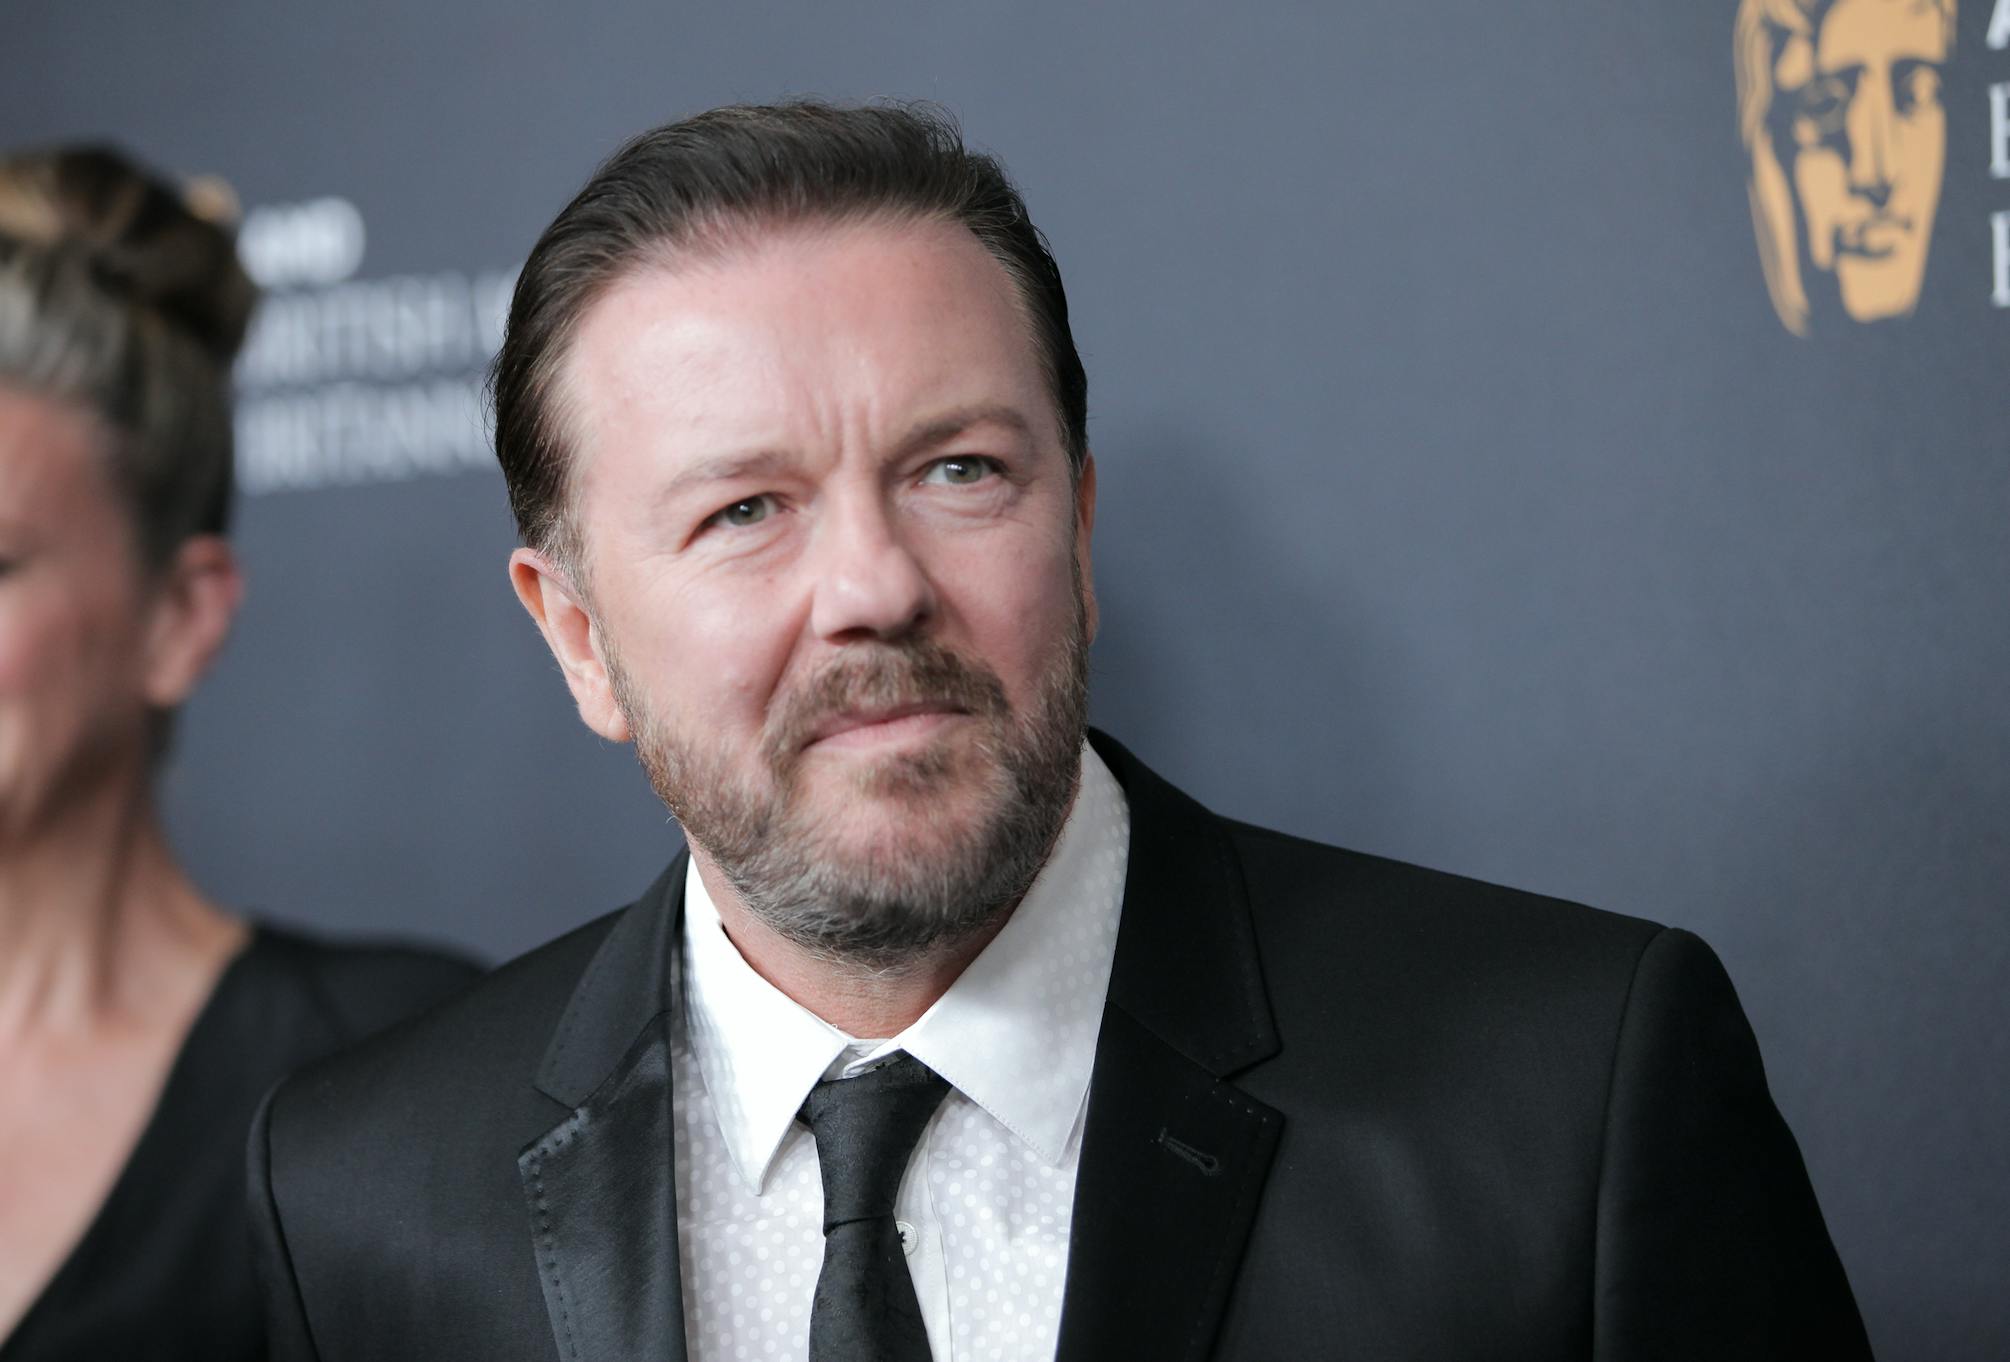 https://imgix.seoghoer.dk/media/article/ricky-gervais.png